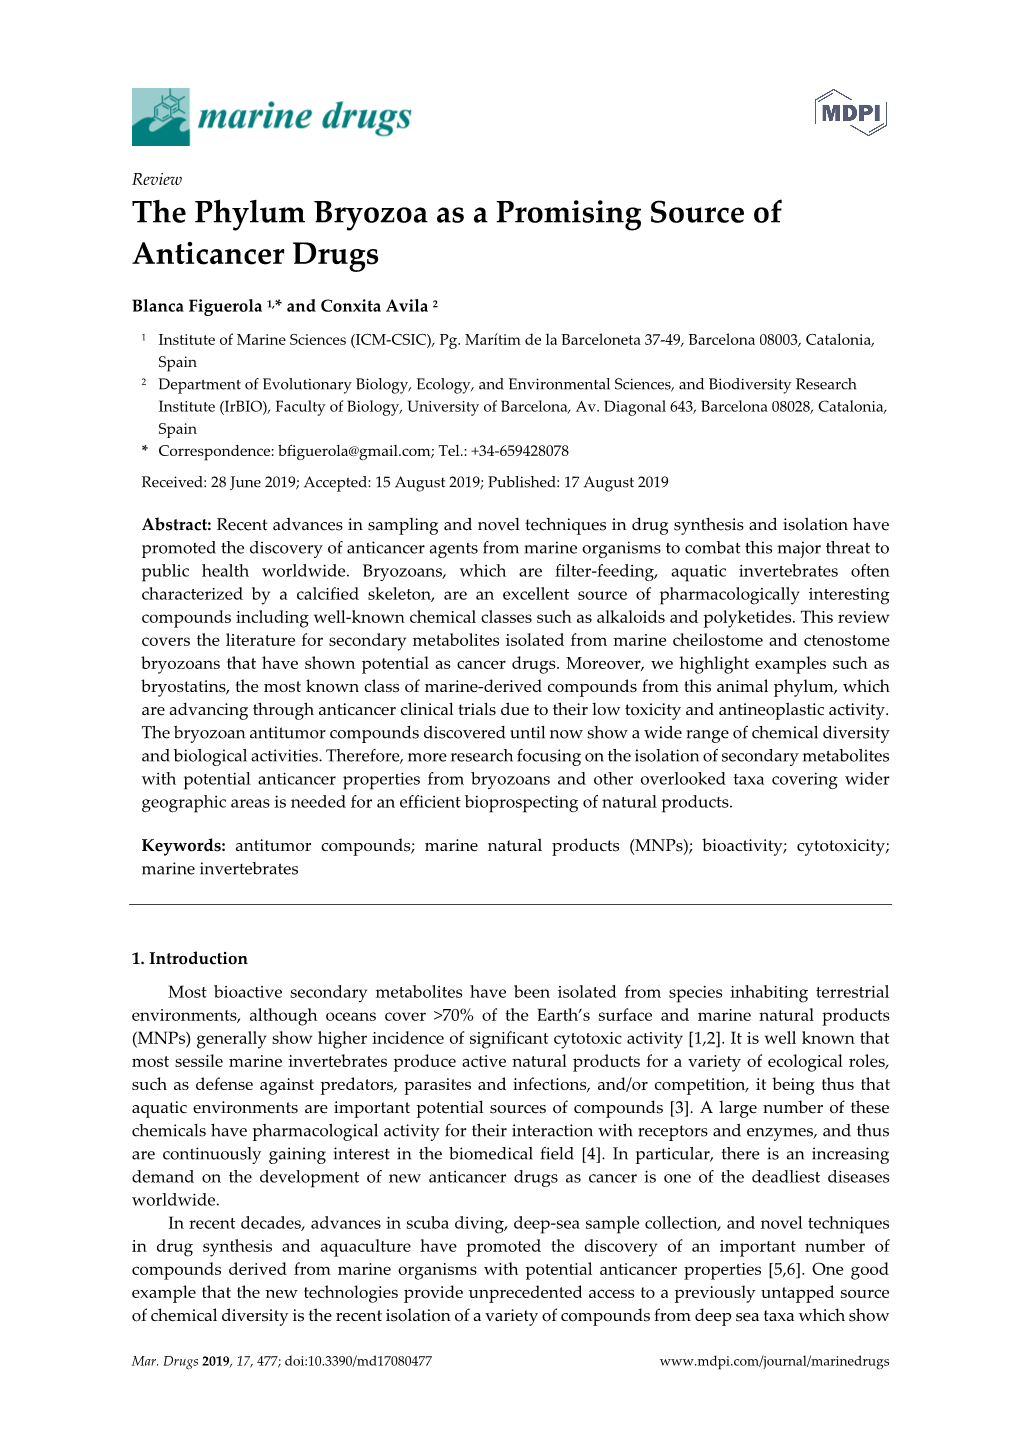 The Phylum Bryozoa As a Promising Source of Anticancer Drugs